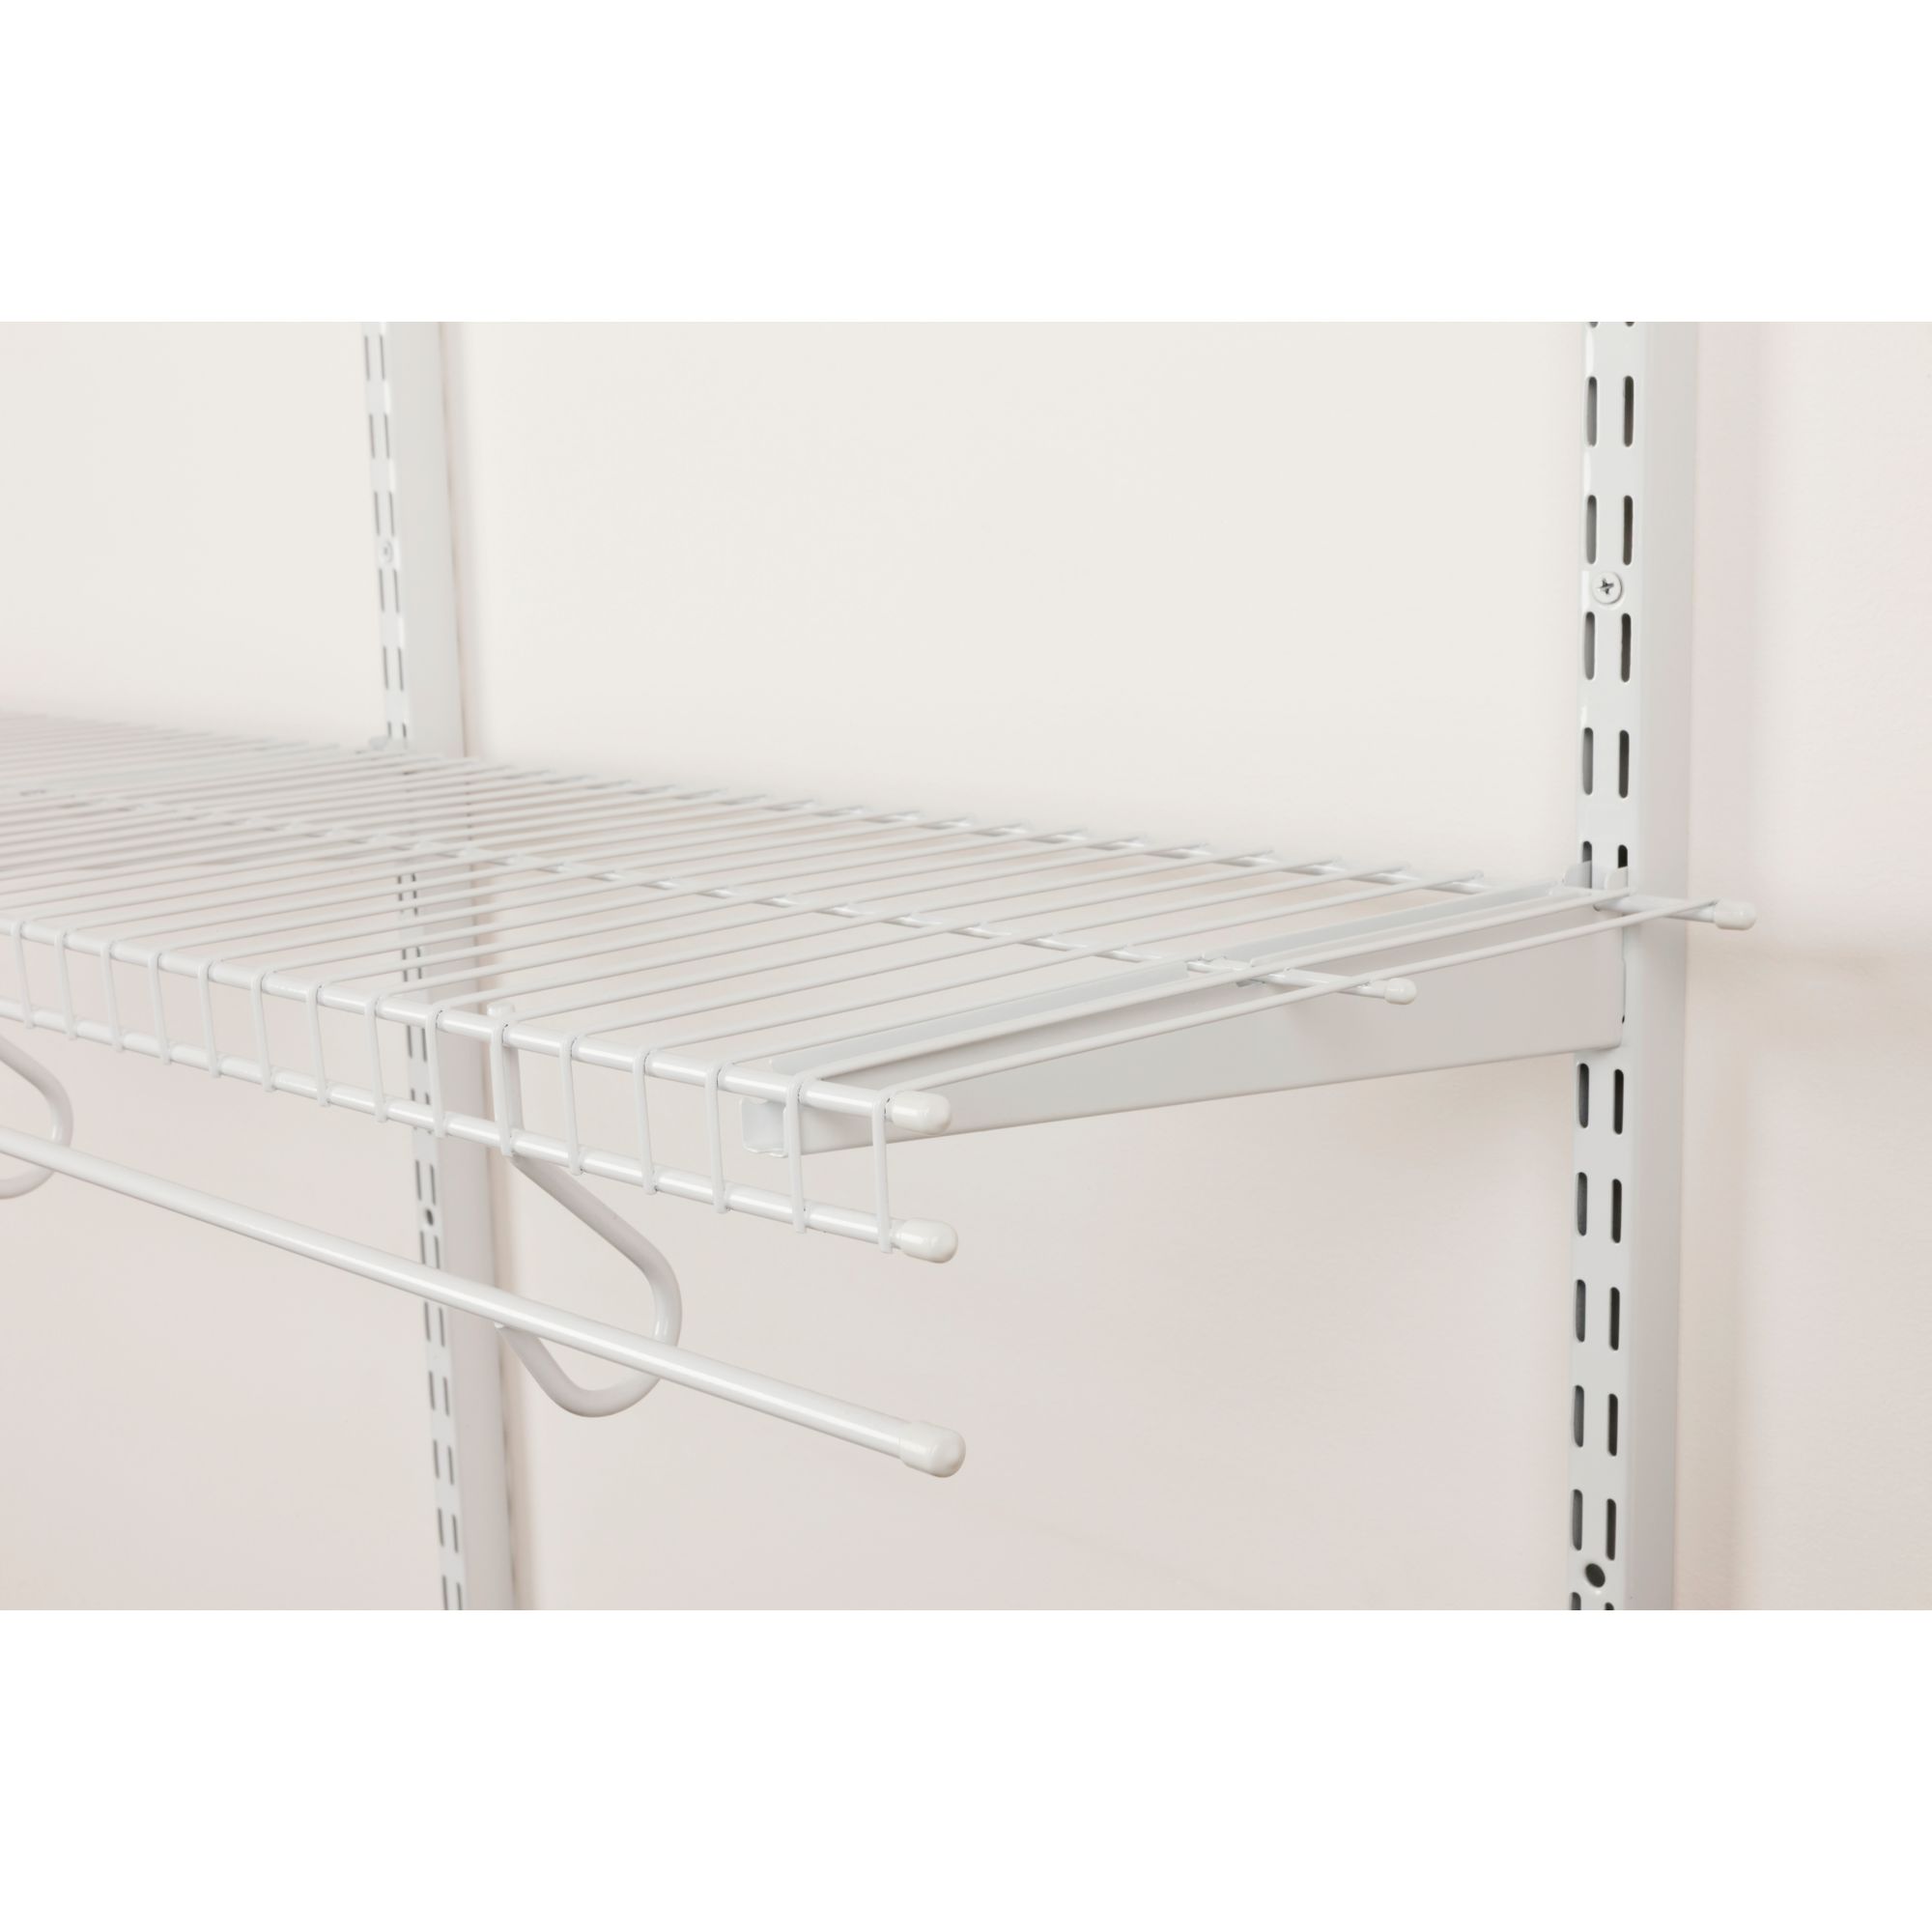 Rubbermaid HomeFree 2-ft x 12-in White Adjustable Wire Shelf at